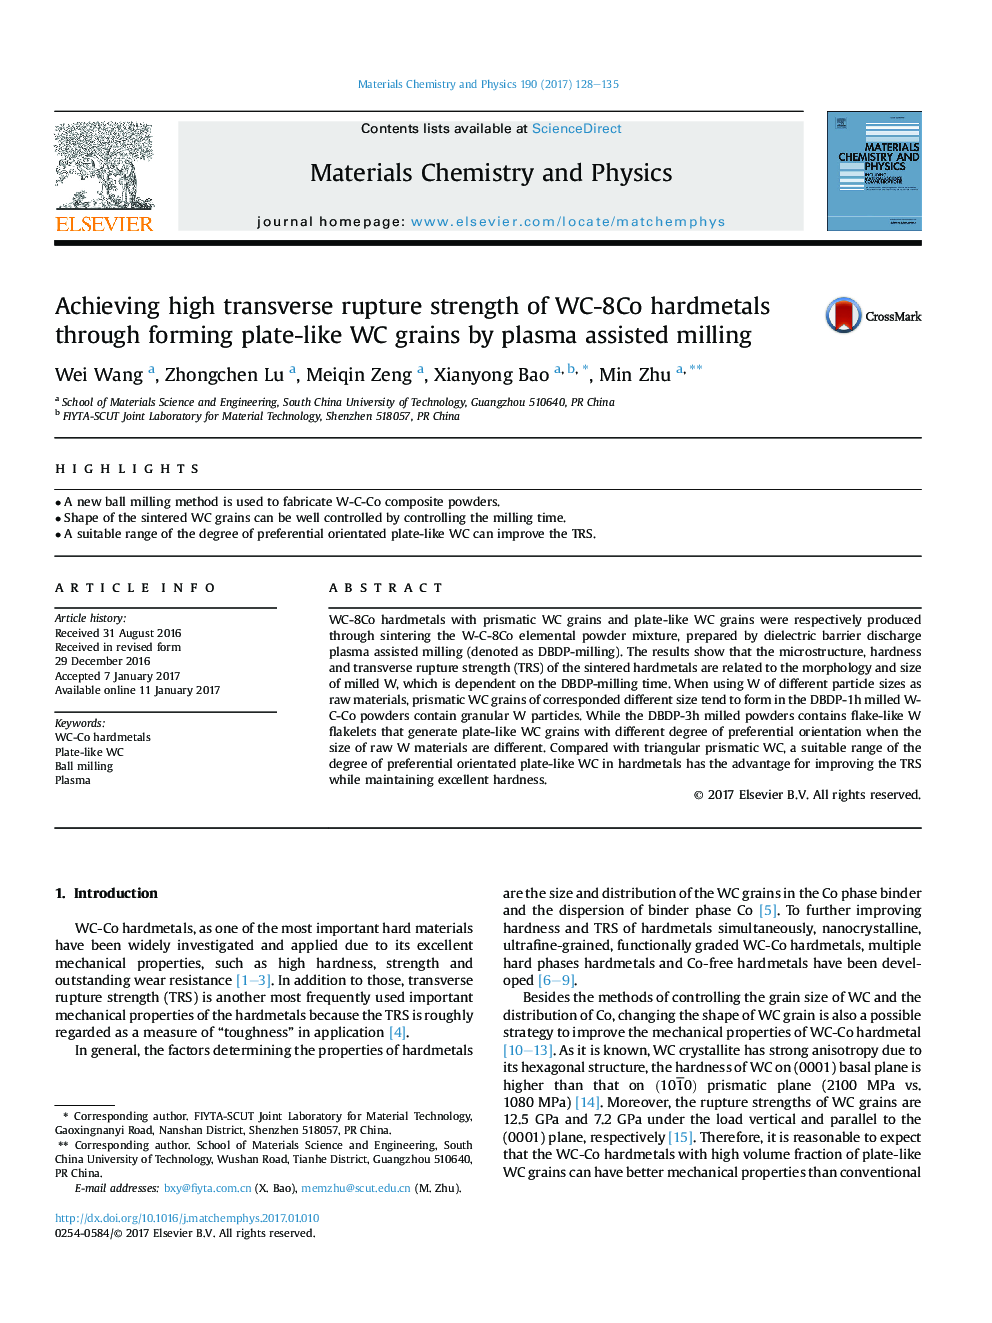 Achieving high transverse rupture strength of WC-8Co hardmetals through forming plate-like WC grains by plasma assisted milling